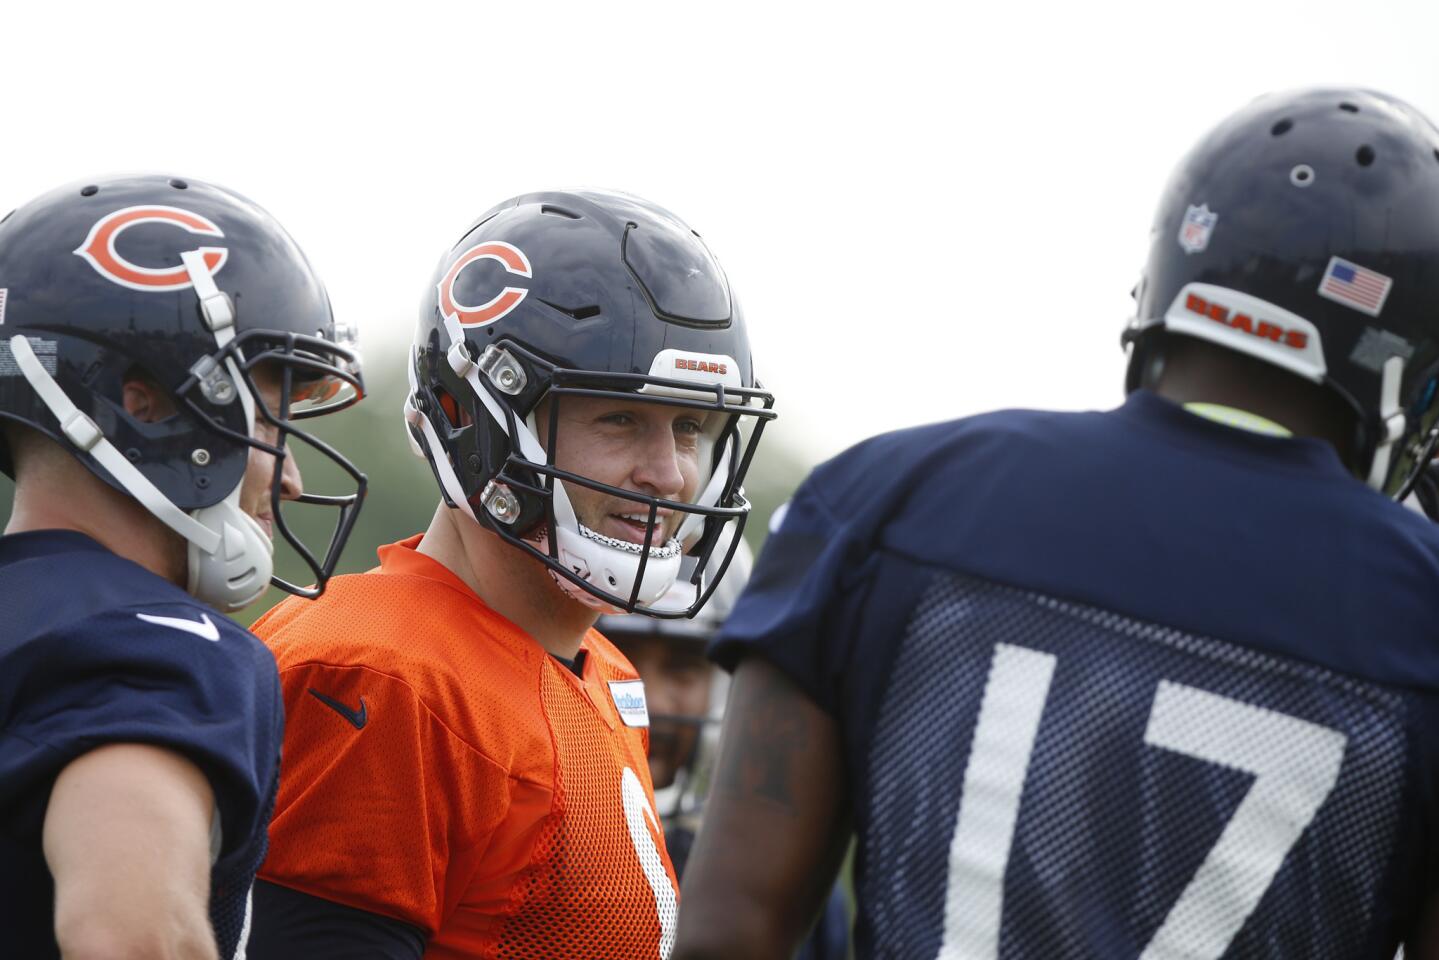 Jay Cutler smiles as he chats with Alshon Jeffery during drills on the first day of Bears training camp in Bourbonnais on Thursday, July 28, 2016.